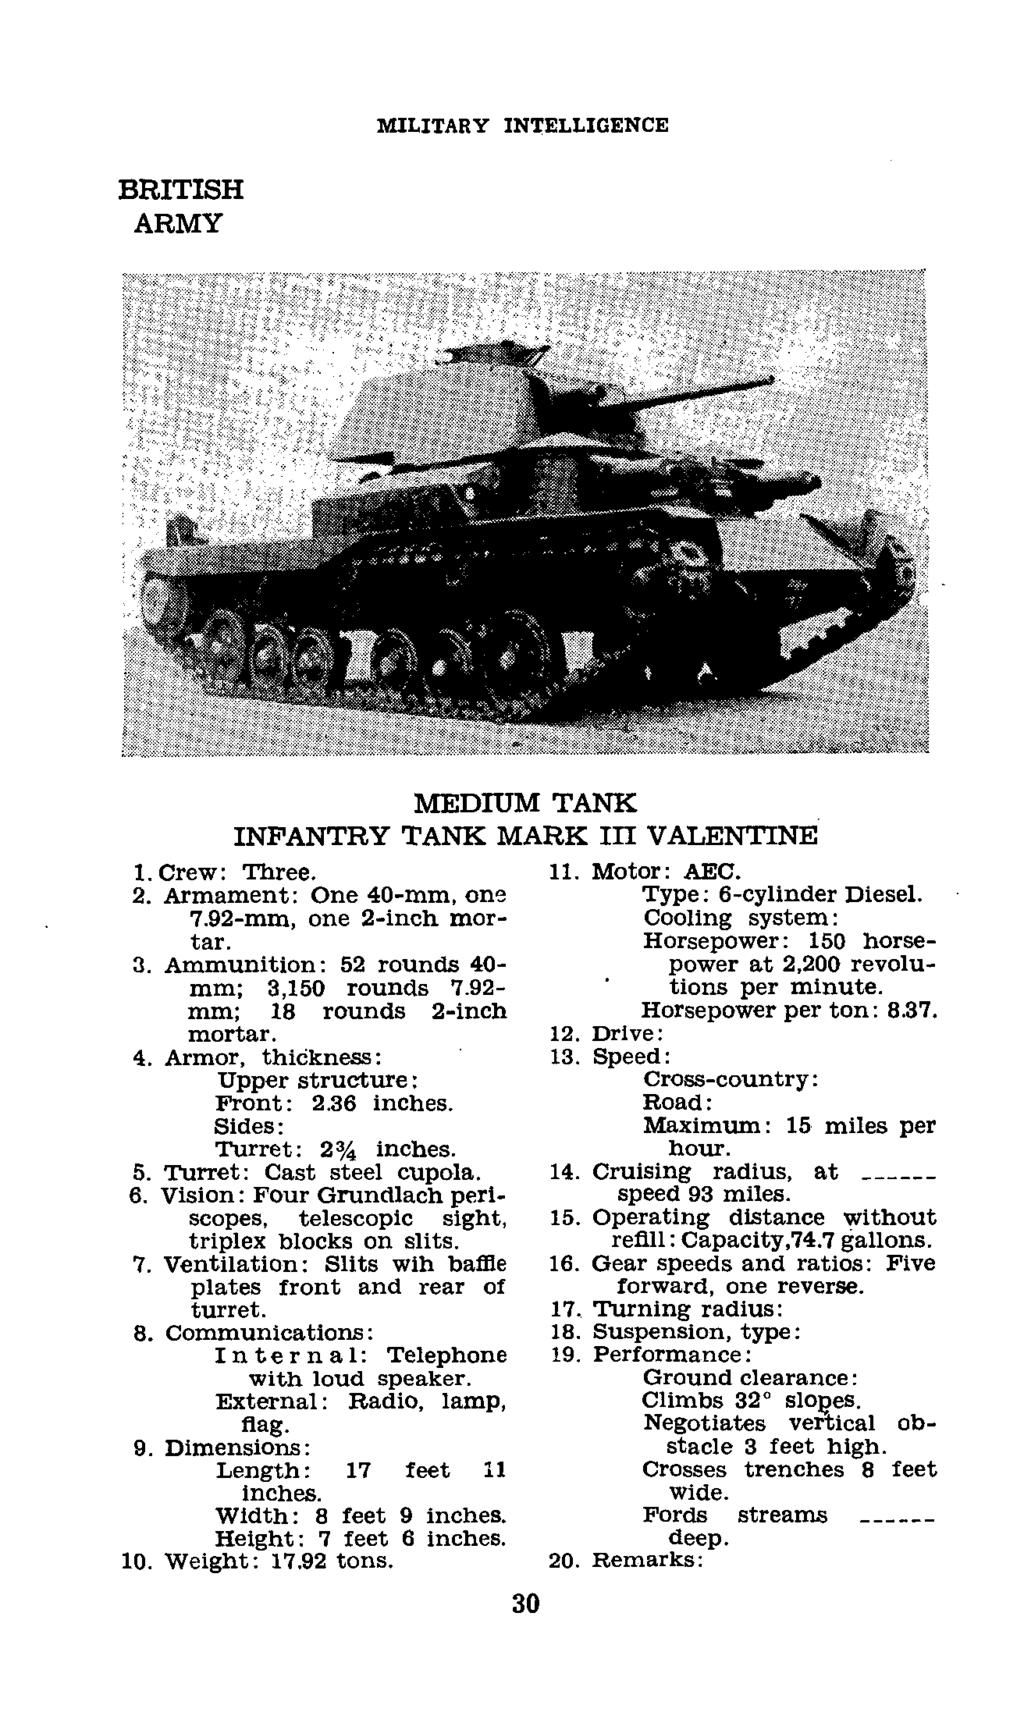 MILITARY INTELLIGENCE MEDIUM TANK INFANTRY TANK MARK III VALENTINE 1. Crew: Three. 11. Motor: AEC. 2. Armament: One 40-mm, one Type: 6-cylinder Diesel. 7.92-mm, one 2-inch mor- Cooling system: tar.